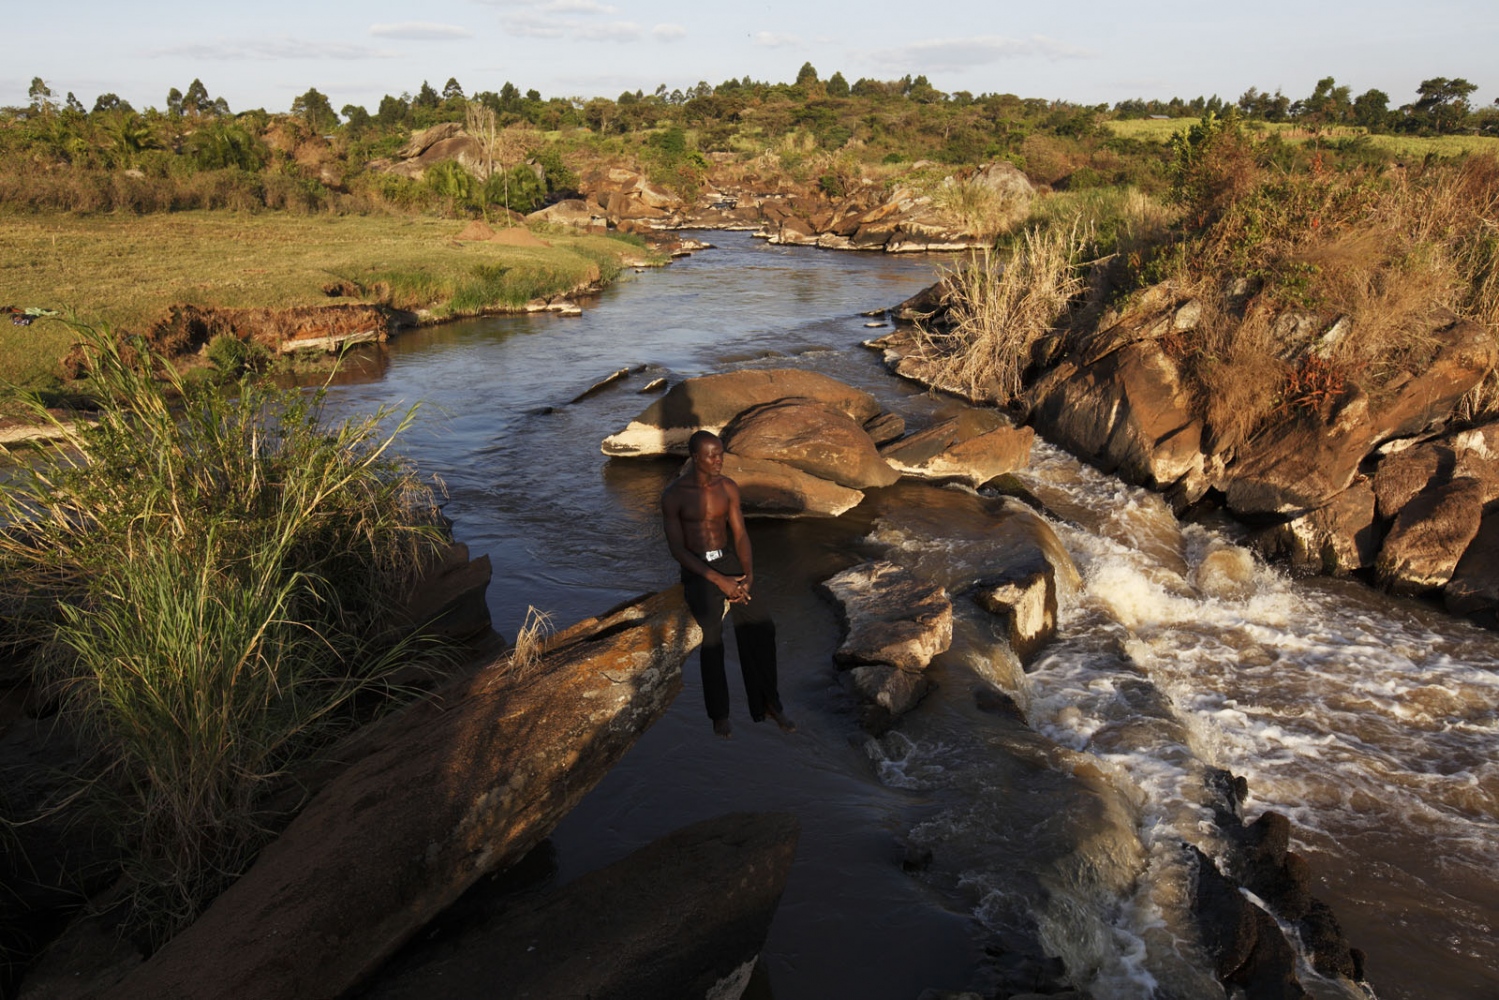 SALT - A salt maker sits and relaxes above the Nzoia River in...